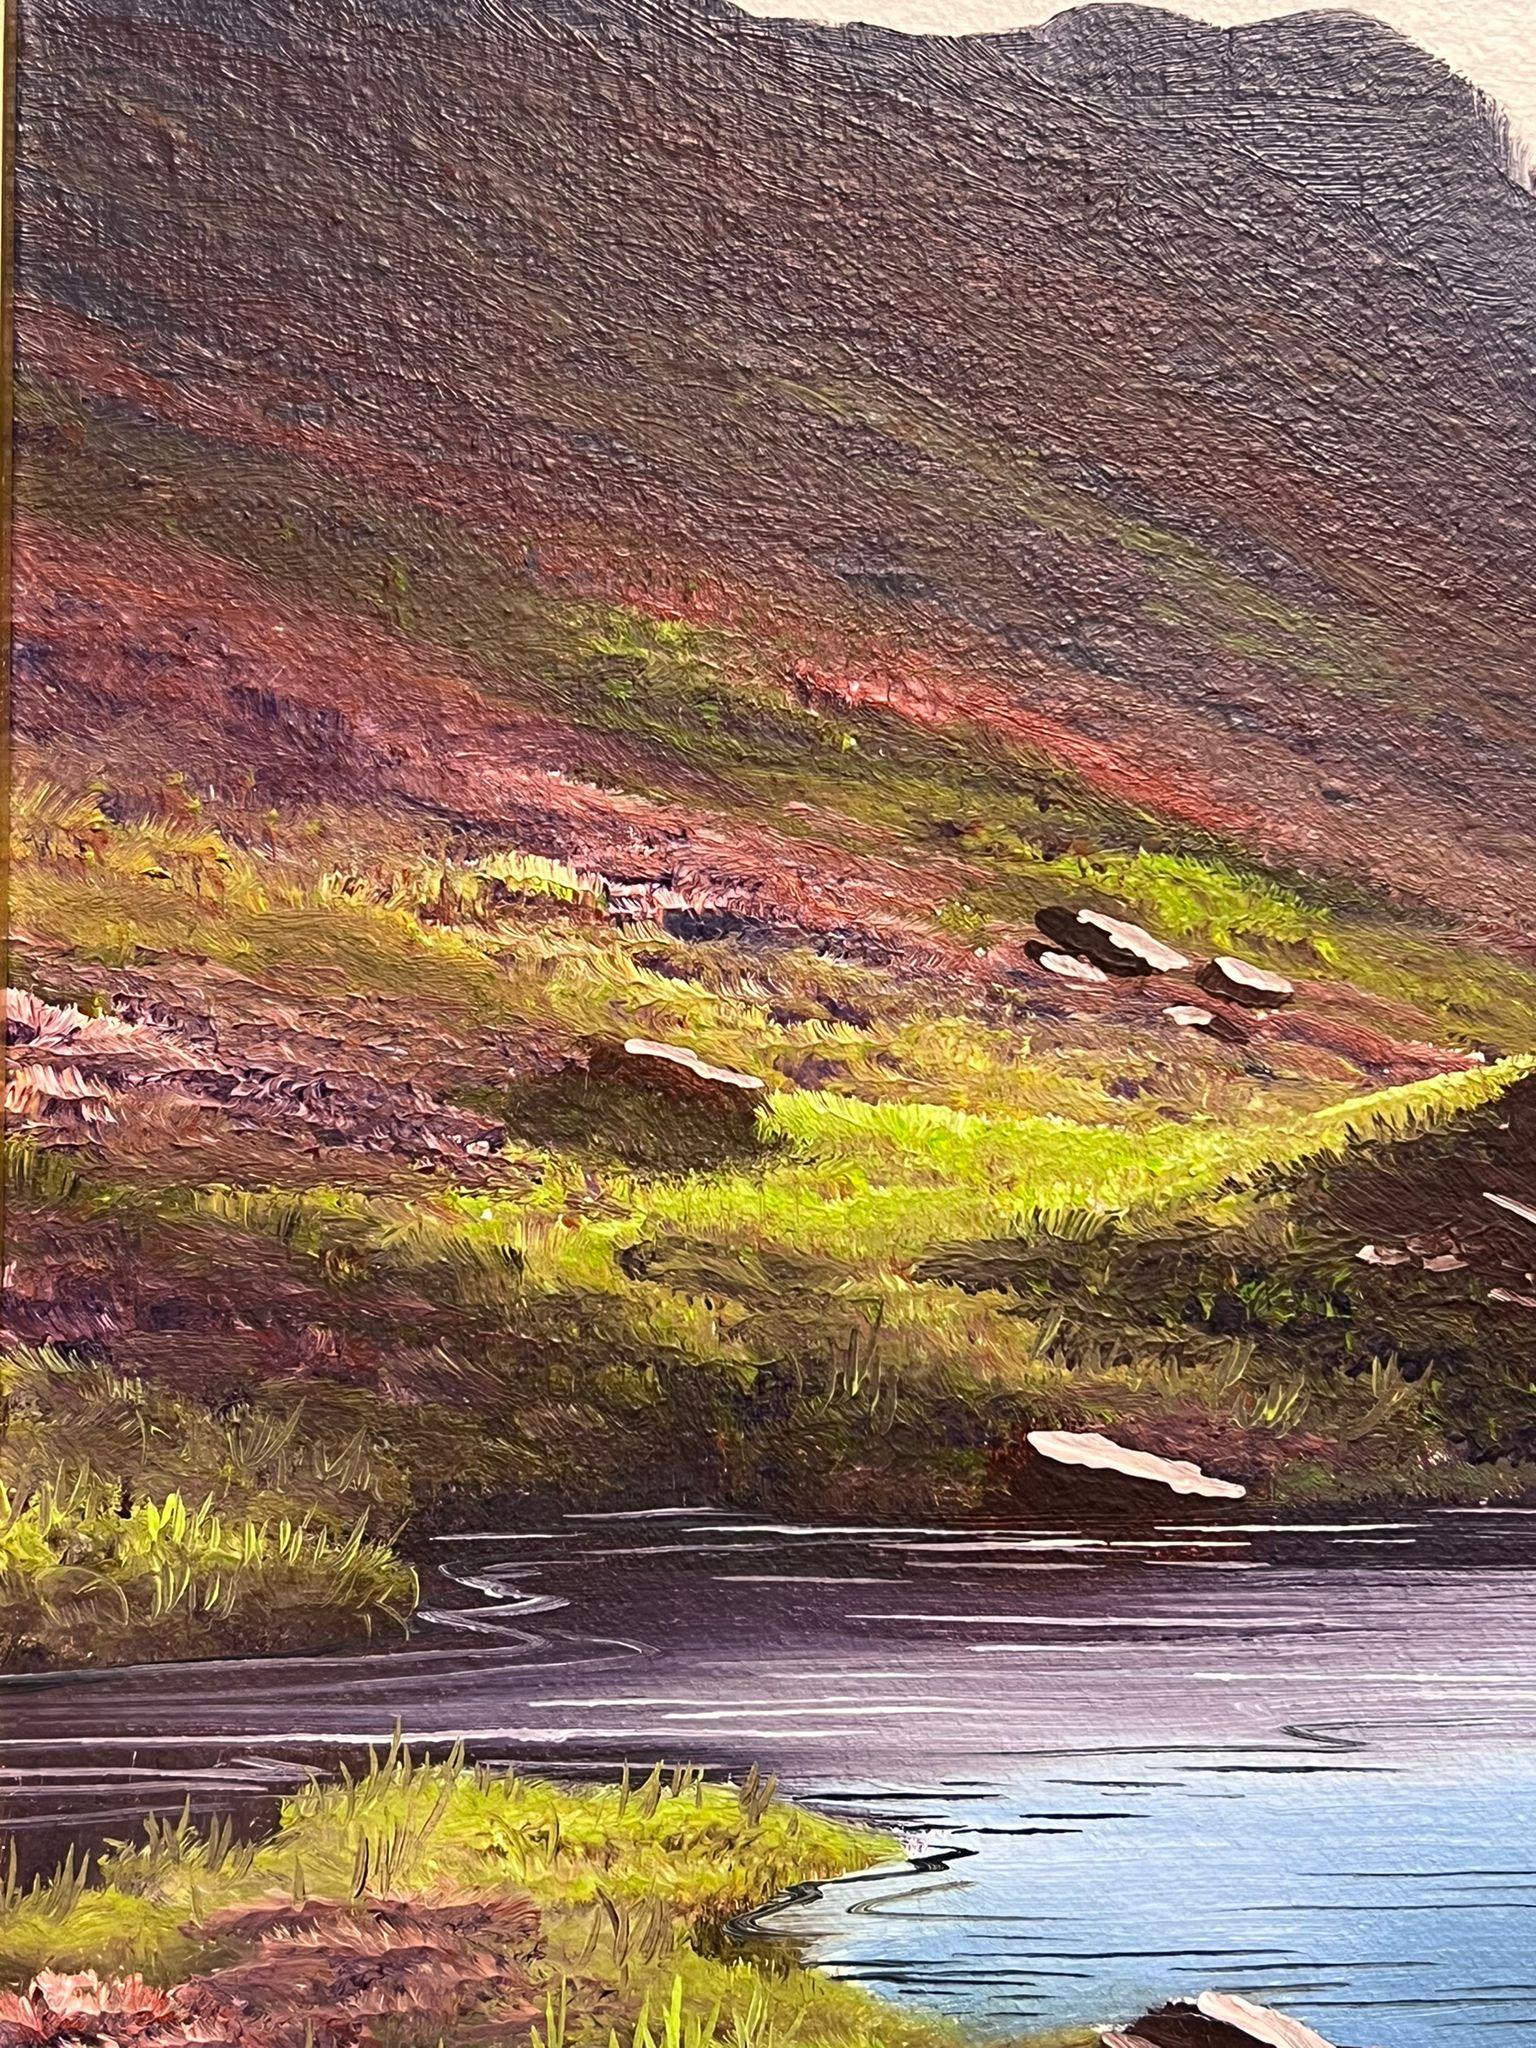 The Highland River Landscape
by Brian Horsewell, British contemporary
signed oil on canvas, framed
framed: 21 x 25.5 inches
canvas: 16.5 x 20 inches
provenance: private collection, UK
condition: overall very good and sound condition 